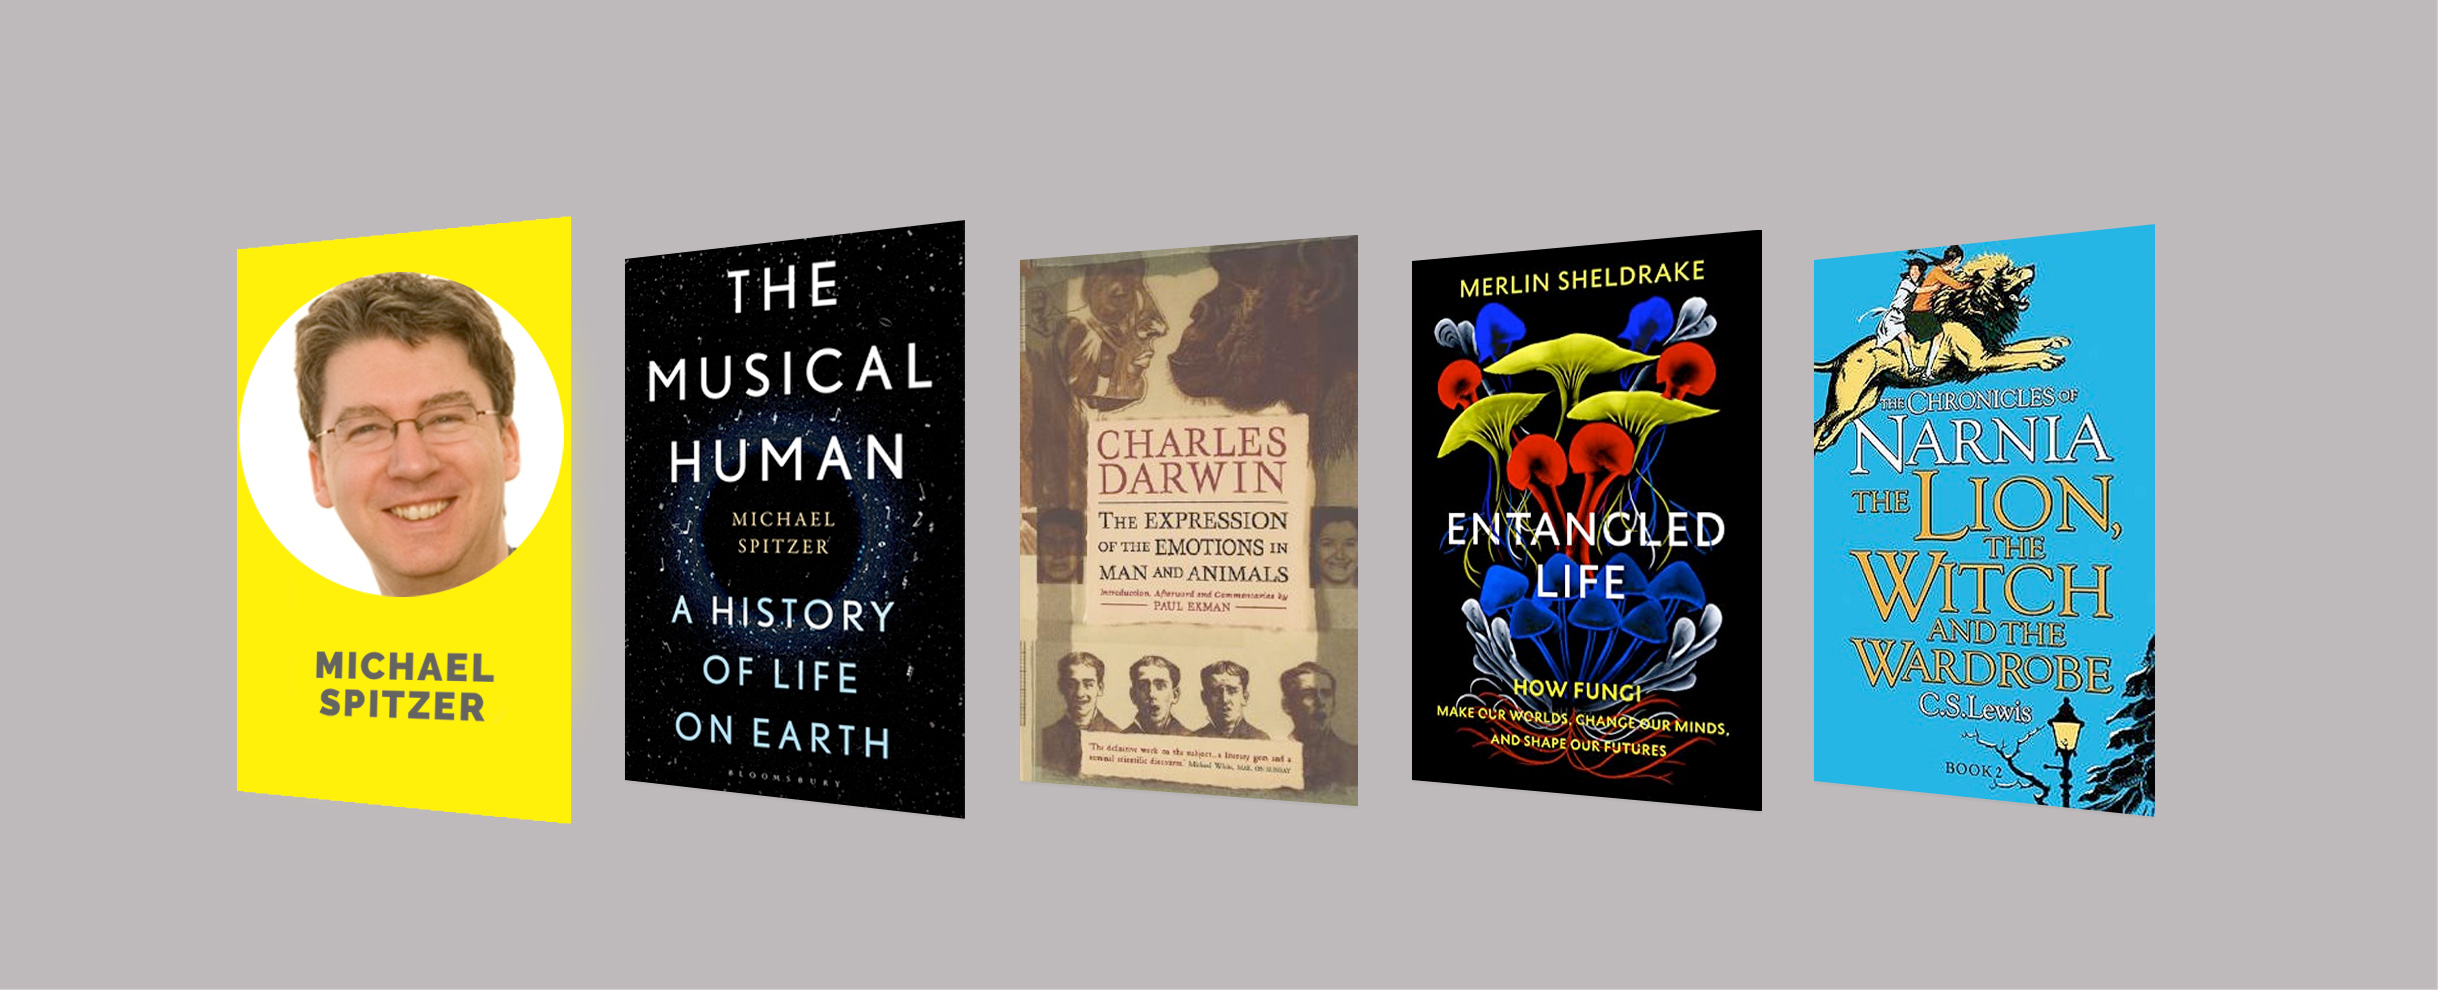 Interview with Michael Spitzer, author of The Musical Human: A History of Life on Earth